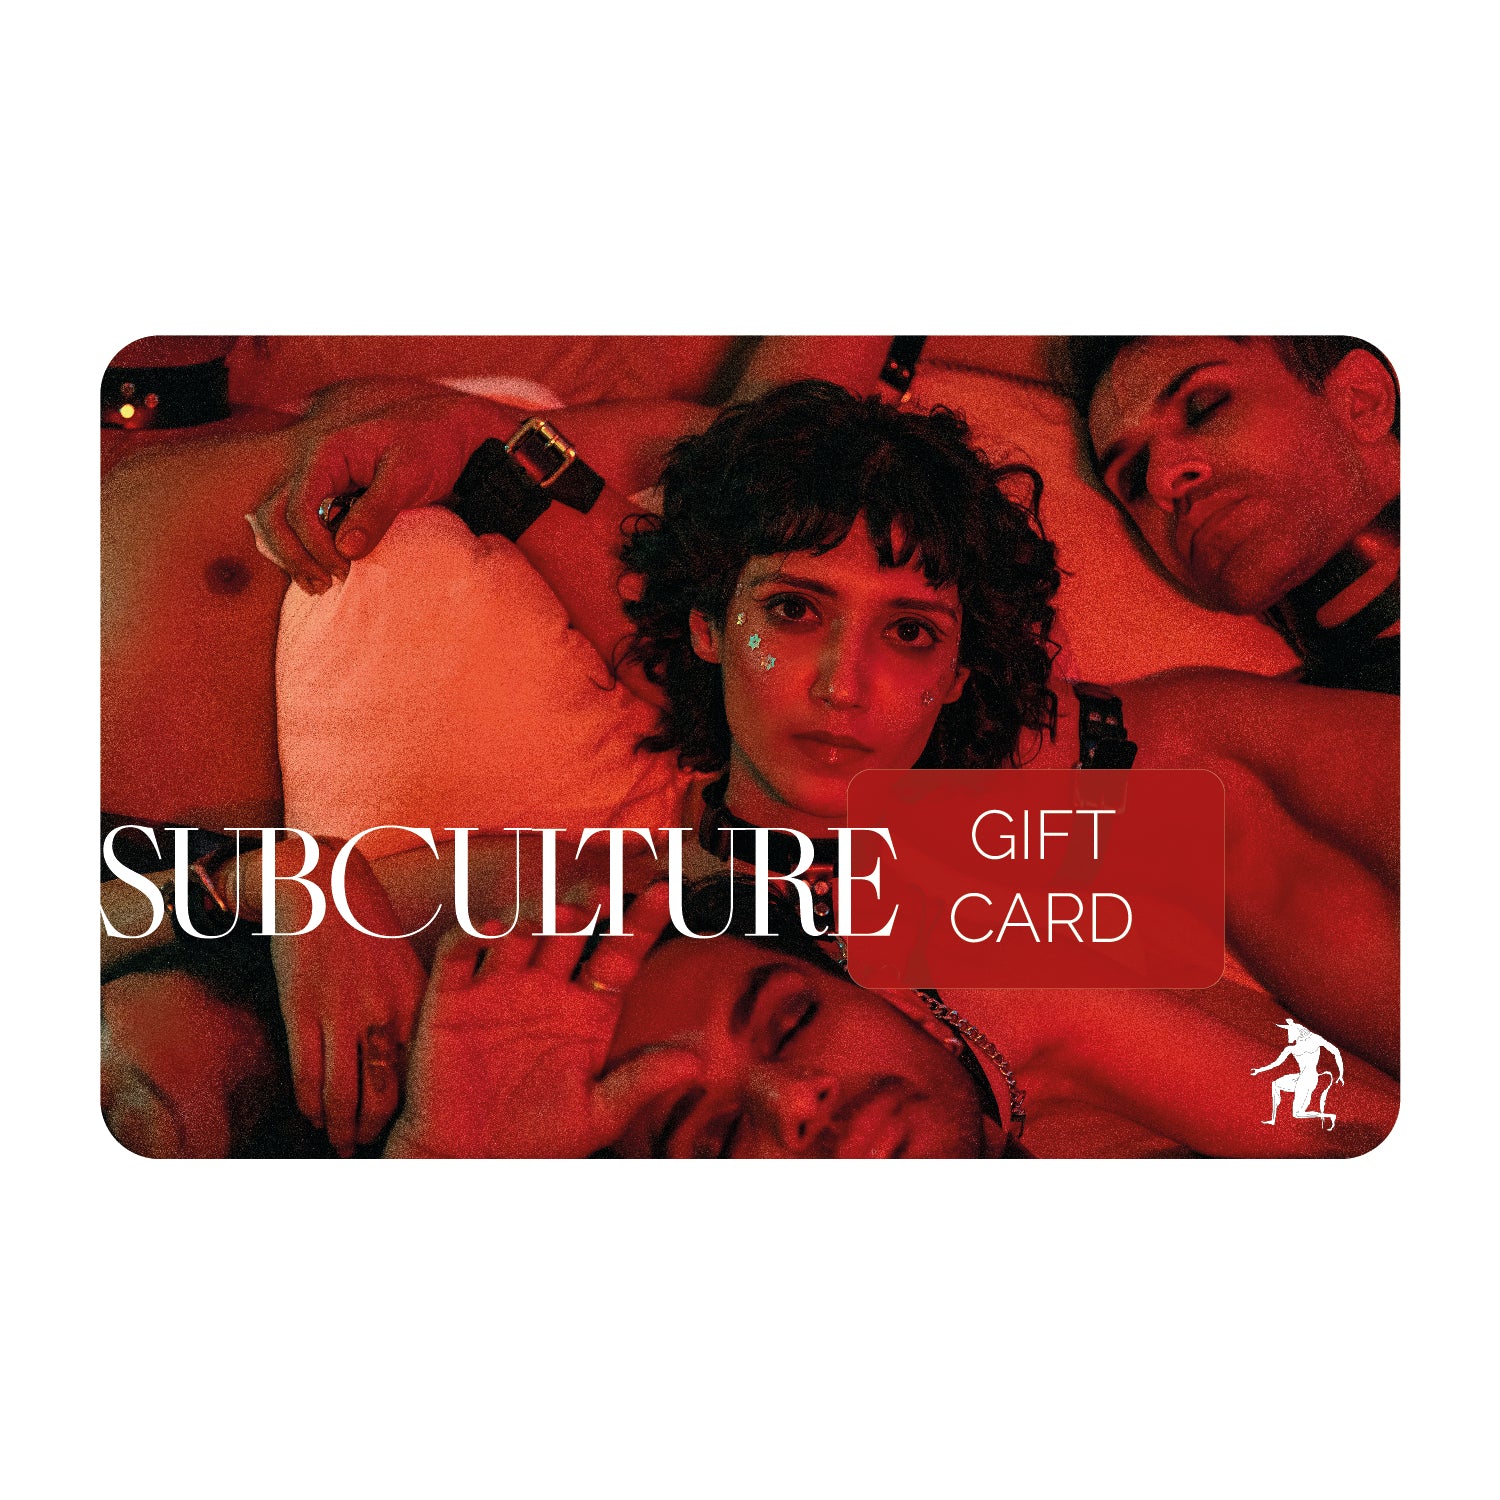 Subculture Gift Card - Subculture